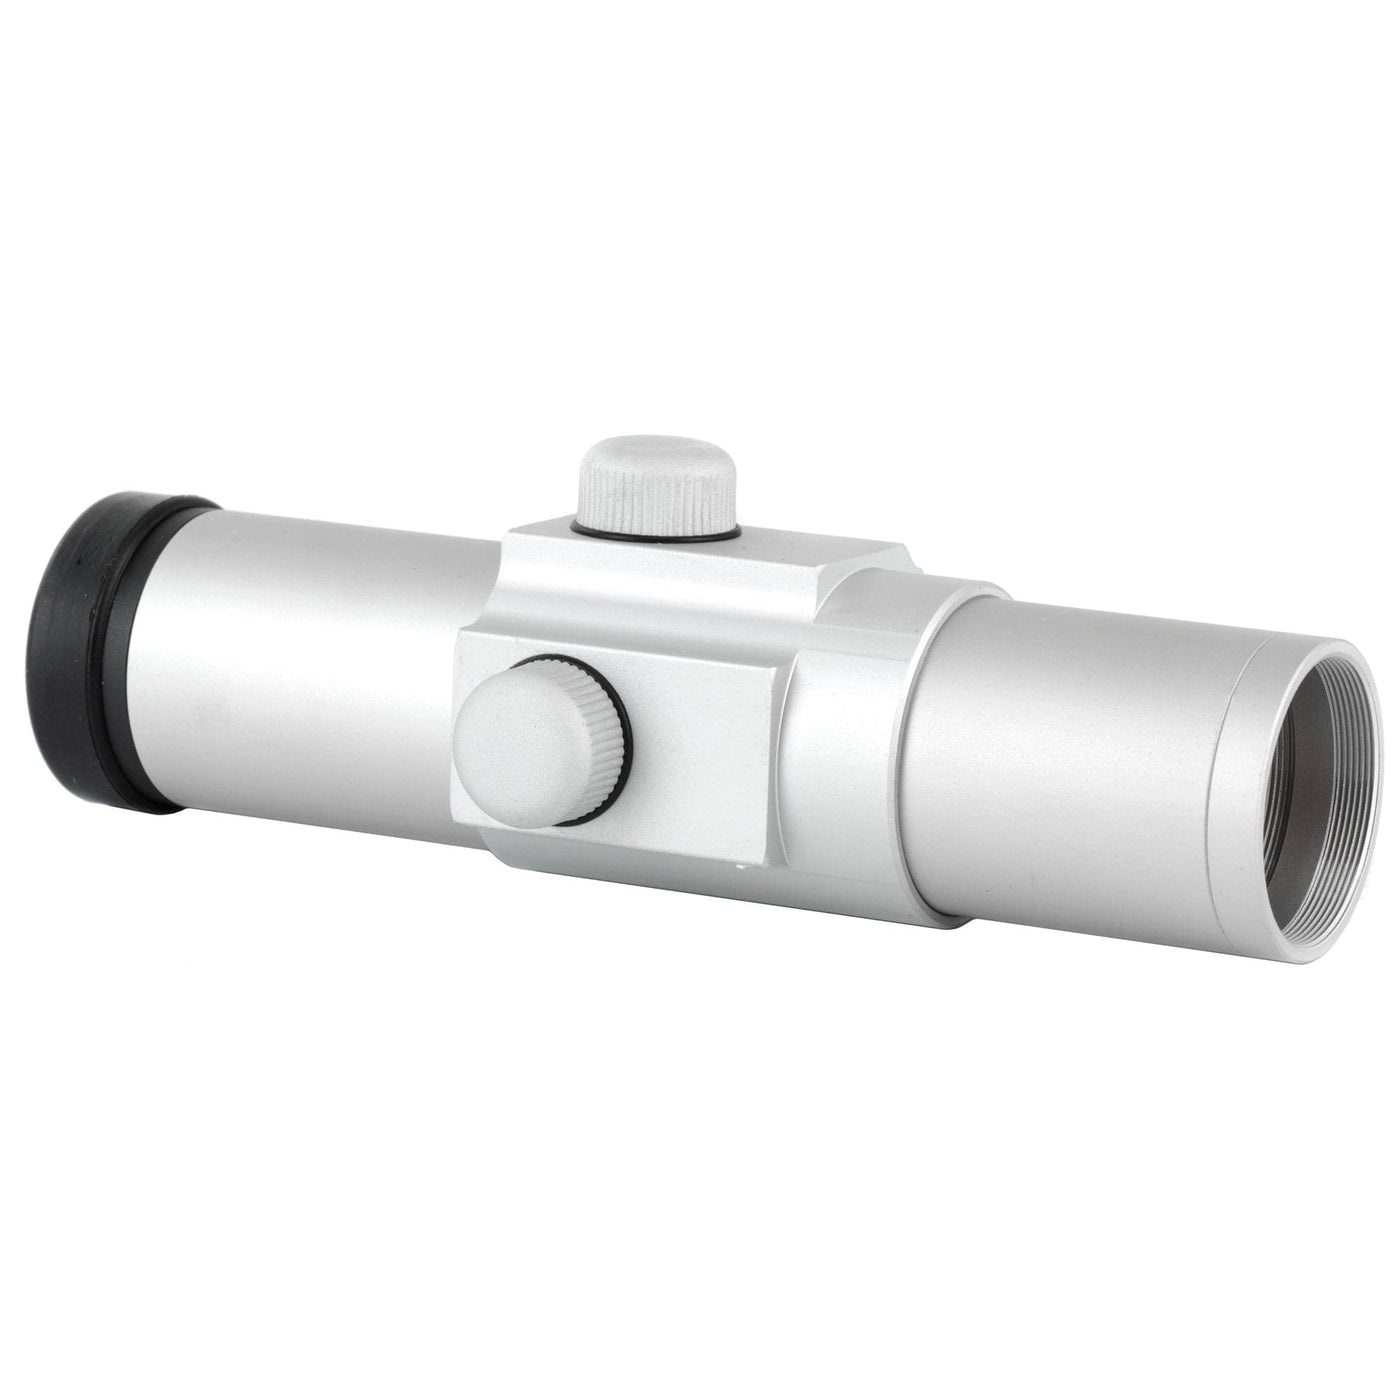 Ultradot Aal Ud 30mm Tube 4" Silver Scopes